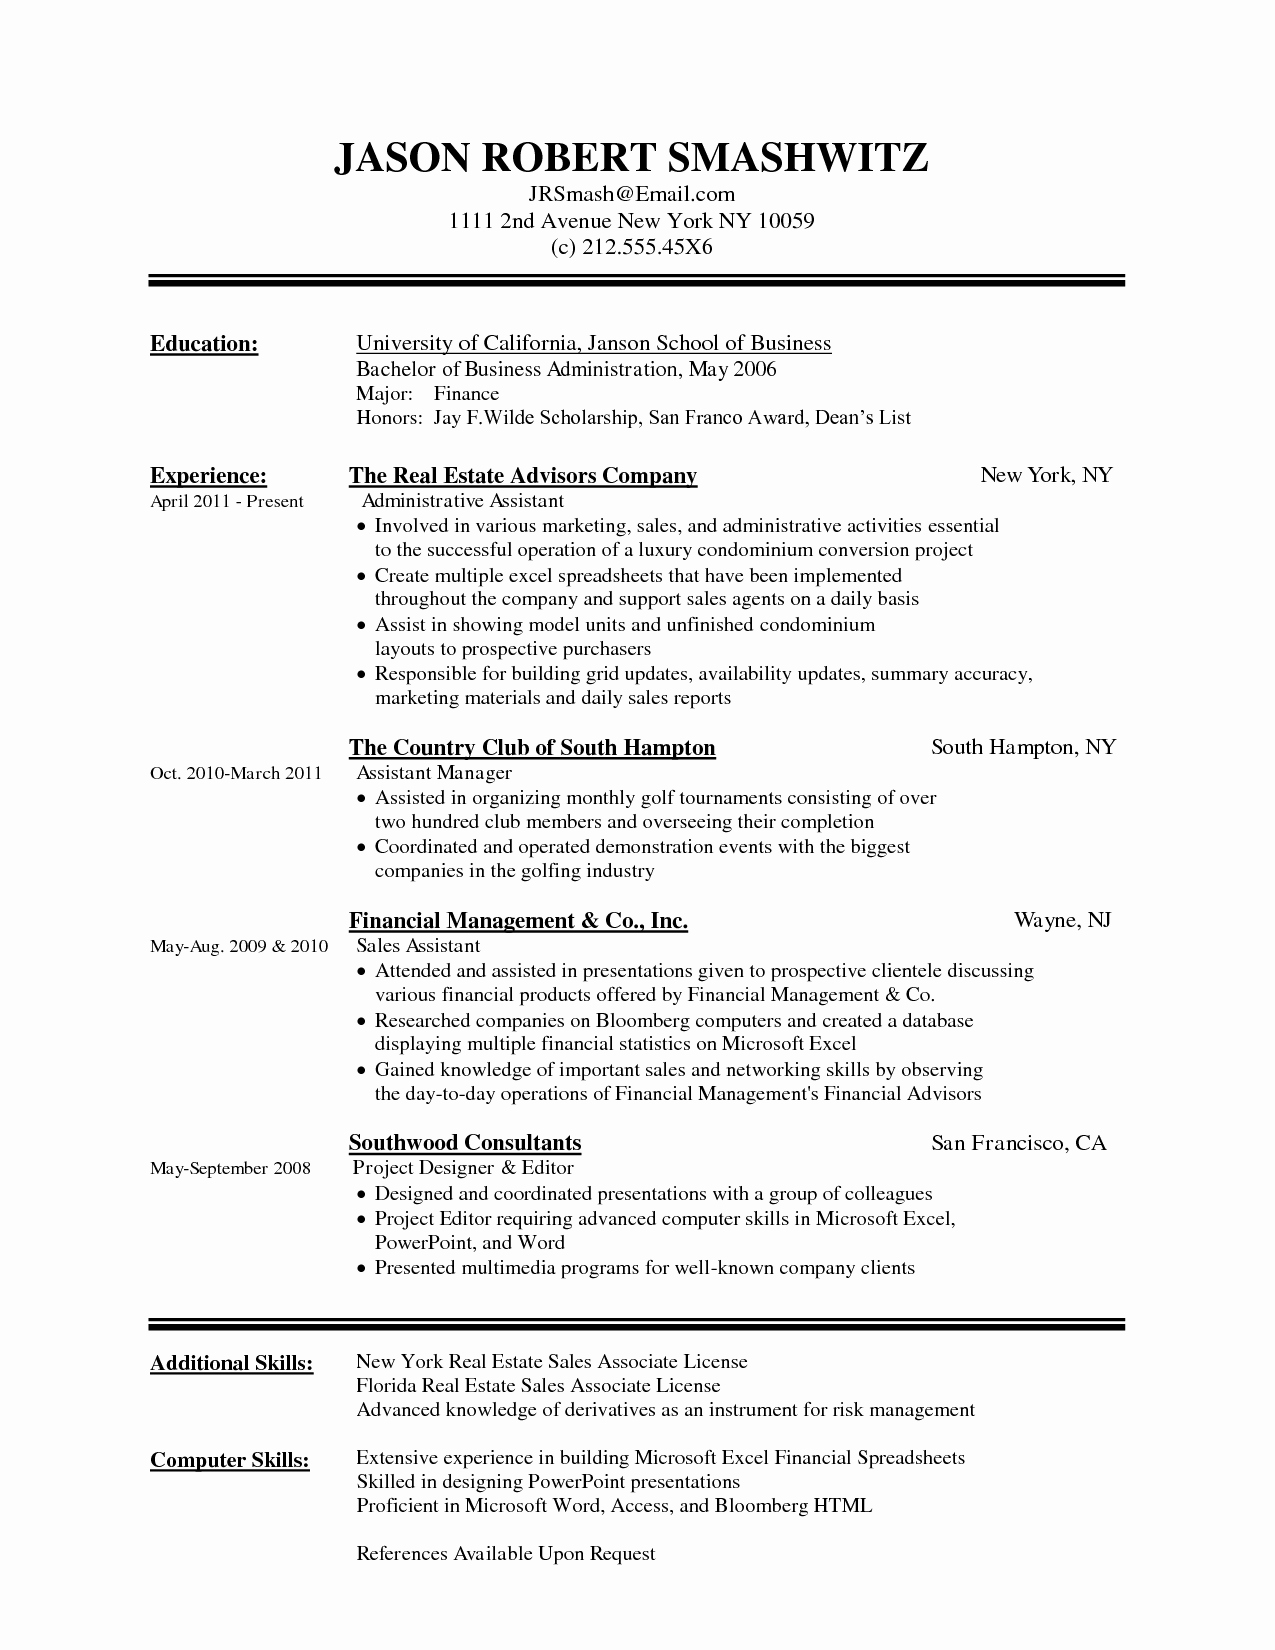 Resume Examples In Word format Inspirational Microsoft Word Resume Templates